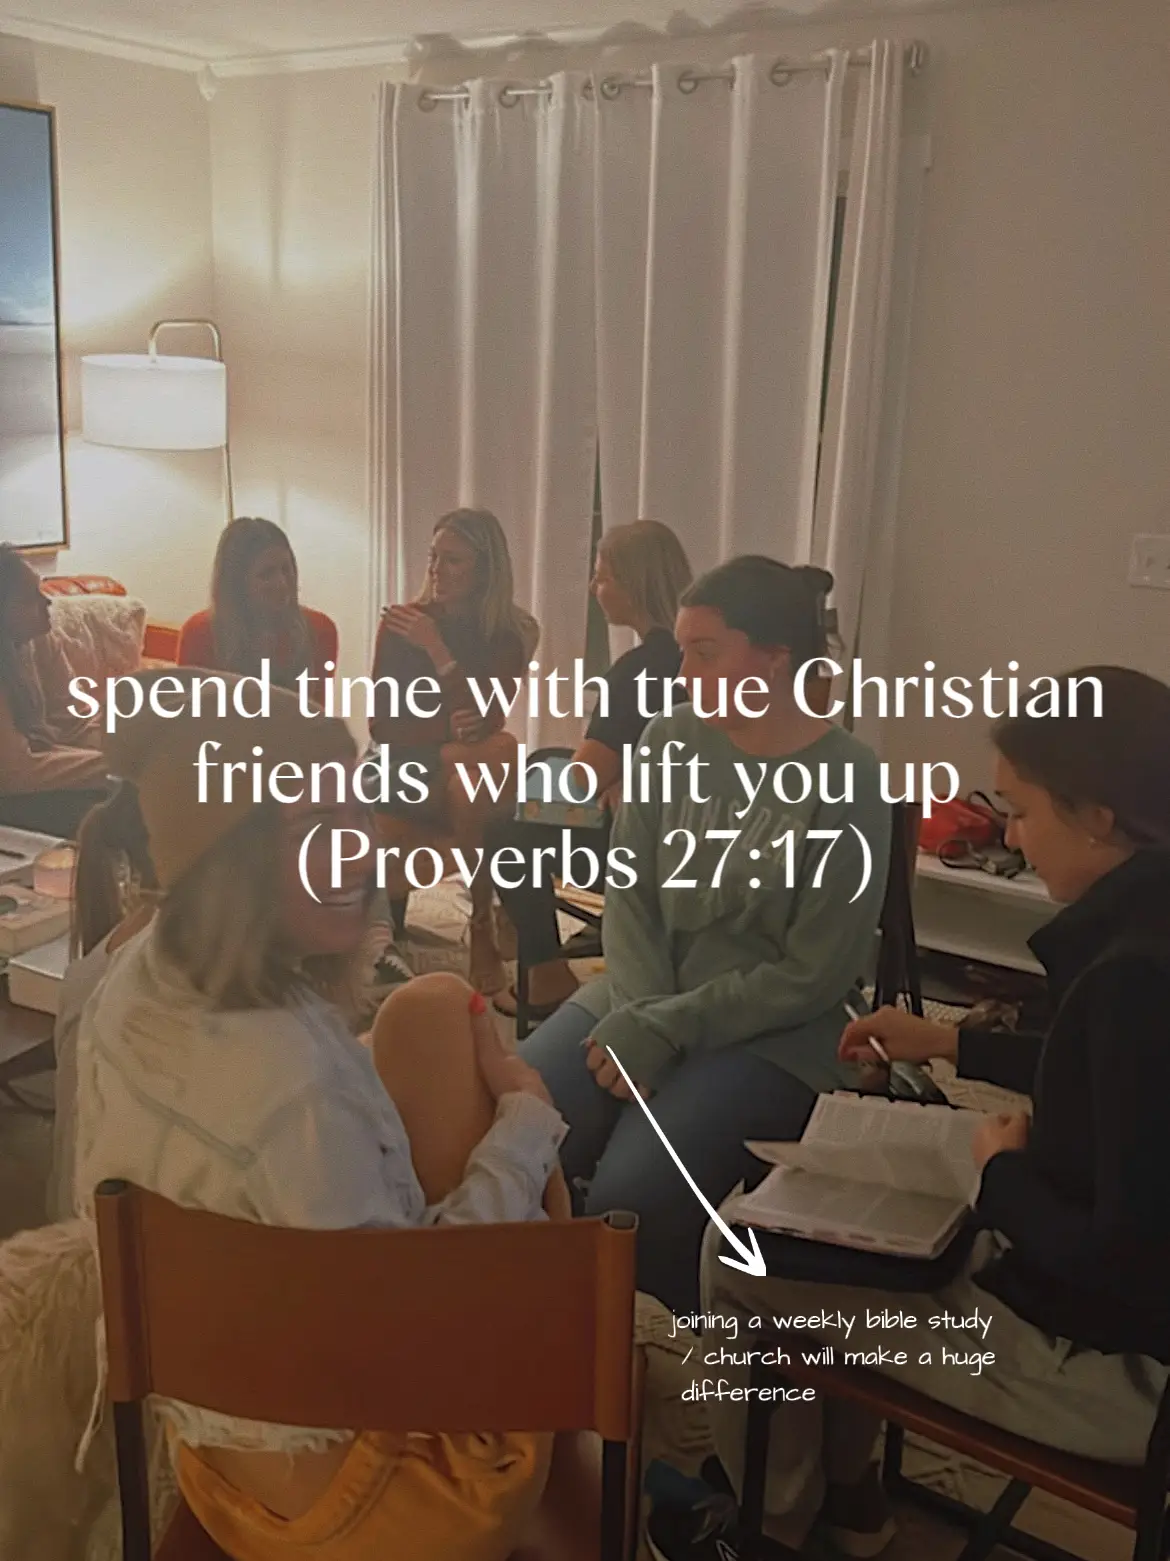  A group of people are sitting around a table with a sign that says "spend time with true Christian friends who lift you up"